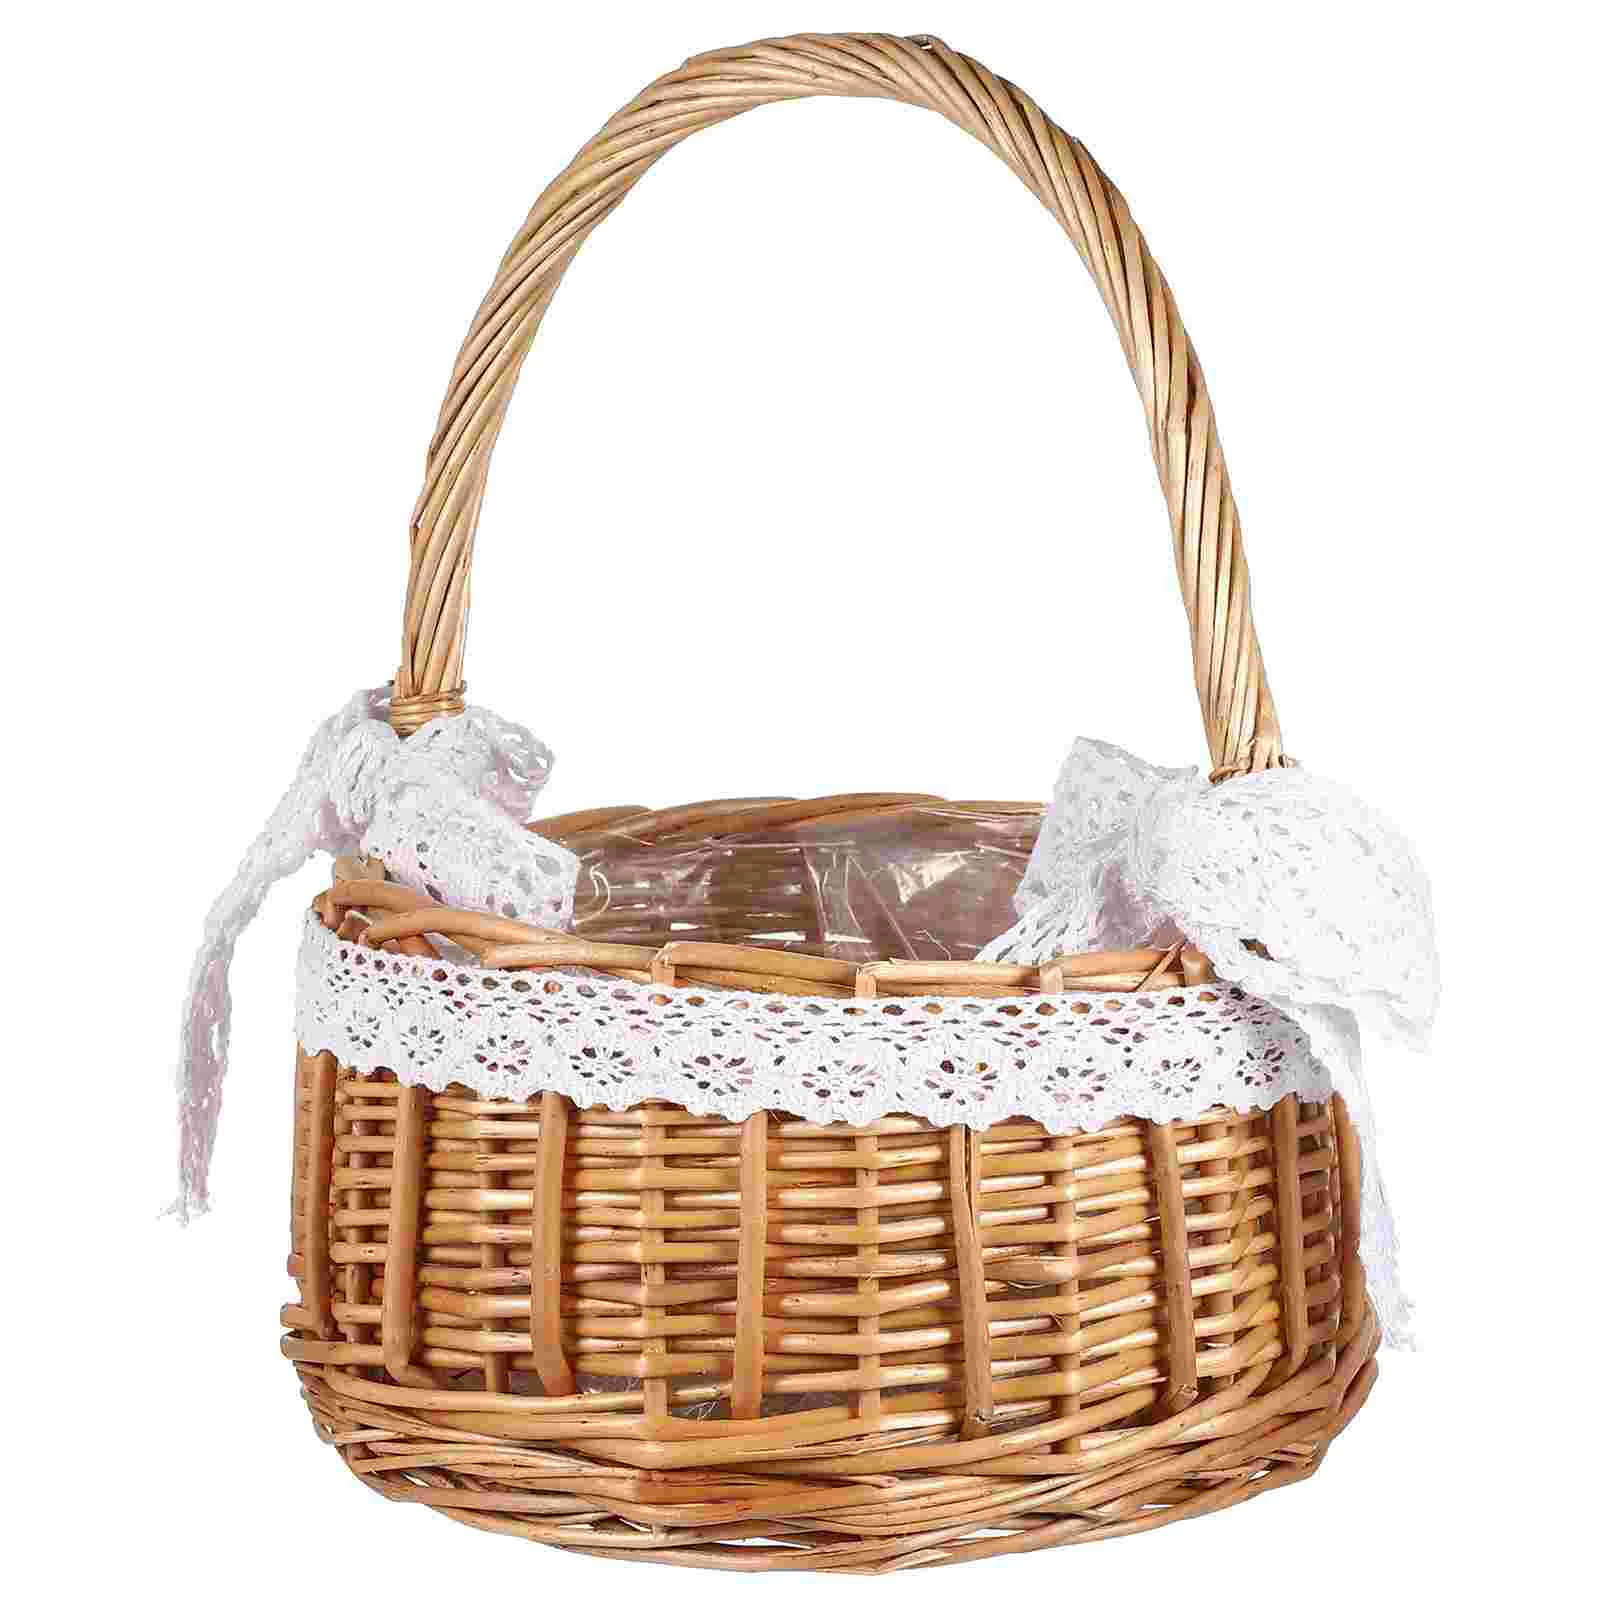 

Basket Wicker Woven Eggs Candy Willow Decorative Designwoven Lace Storage Organizer Sundries Planter Picnic Hanging Handwoven